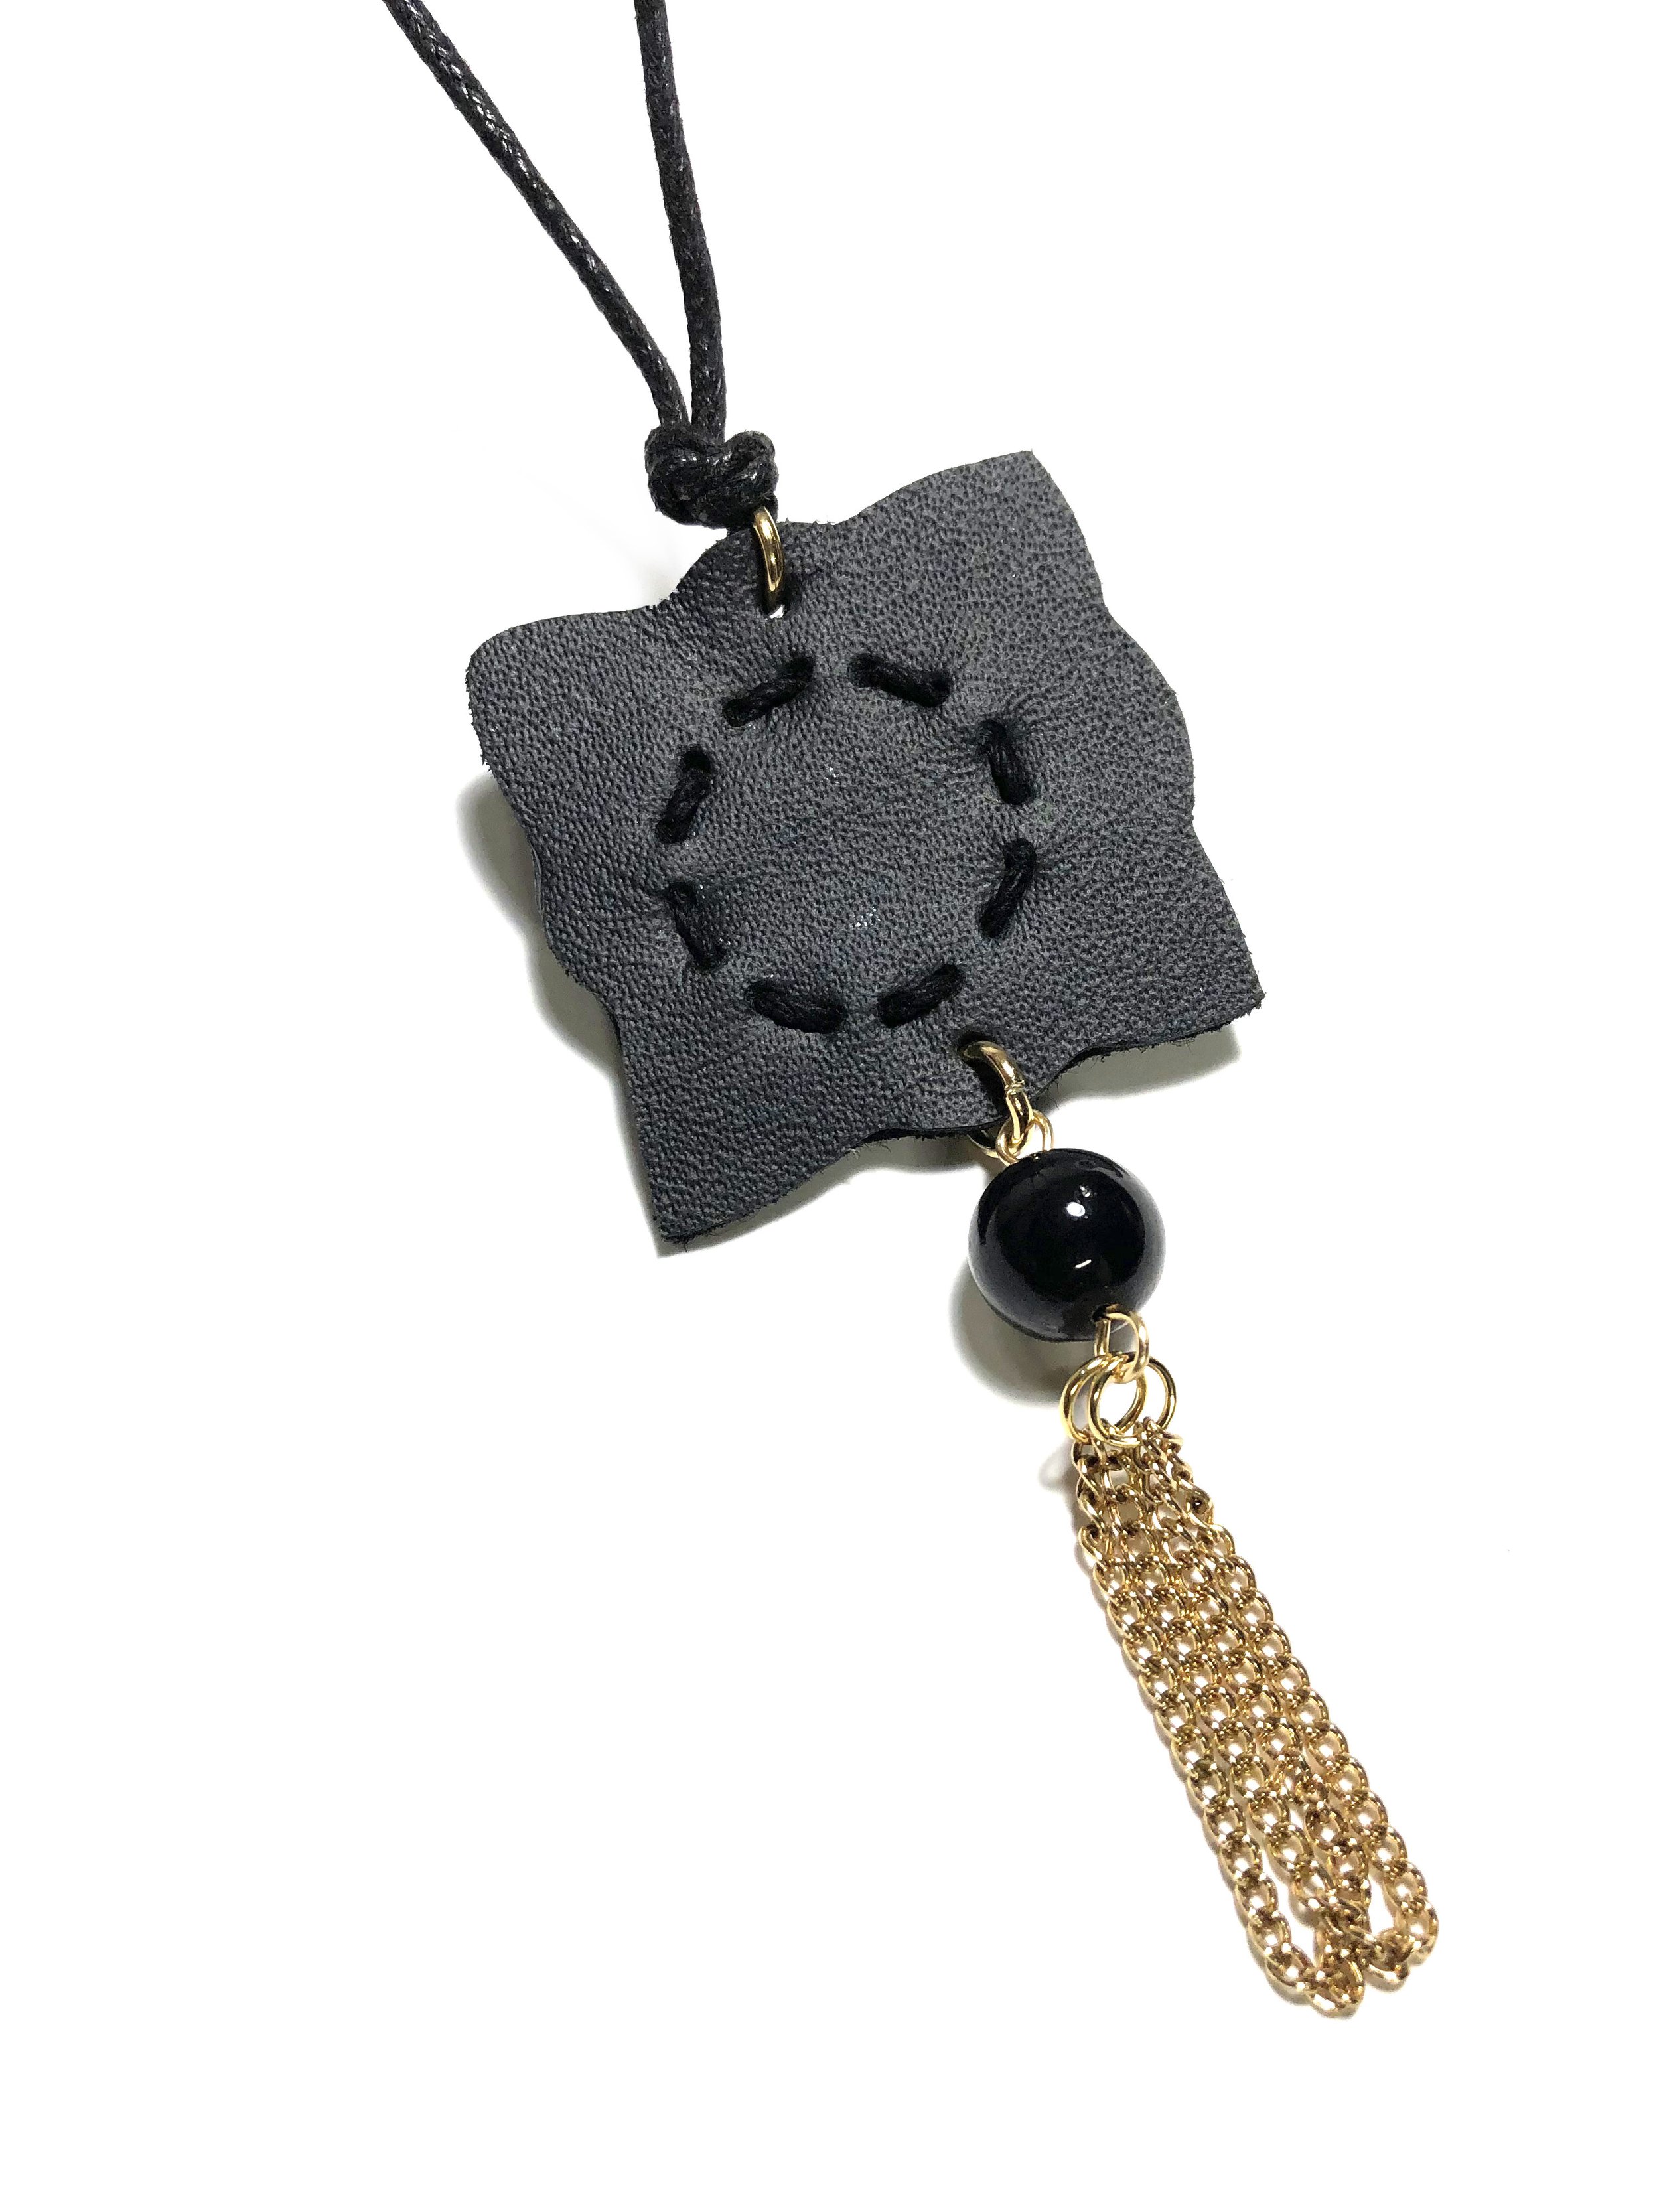 Clover leather necklace with bead and chain accent by Black & Gold Fashions (4).JPG